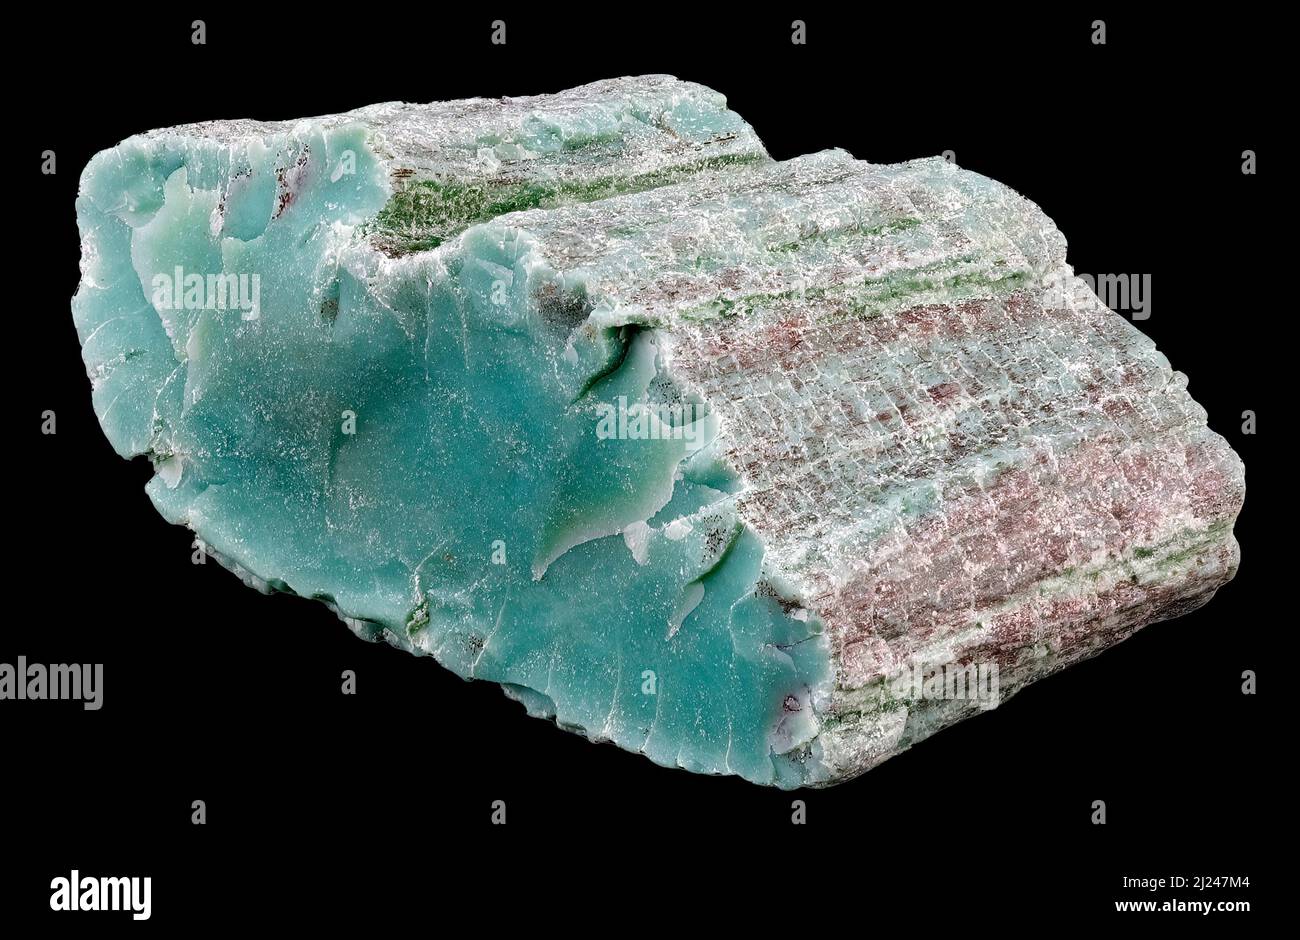 Chromium Petrified Tree Wood (Conifer-Araucarioxylon Arizonicum), The wood has been replaced with mineralized chromium, giving it its green color. It Stock Photo